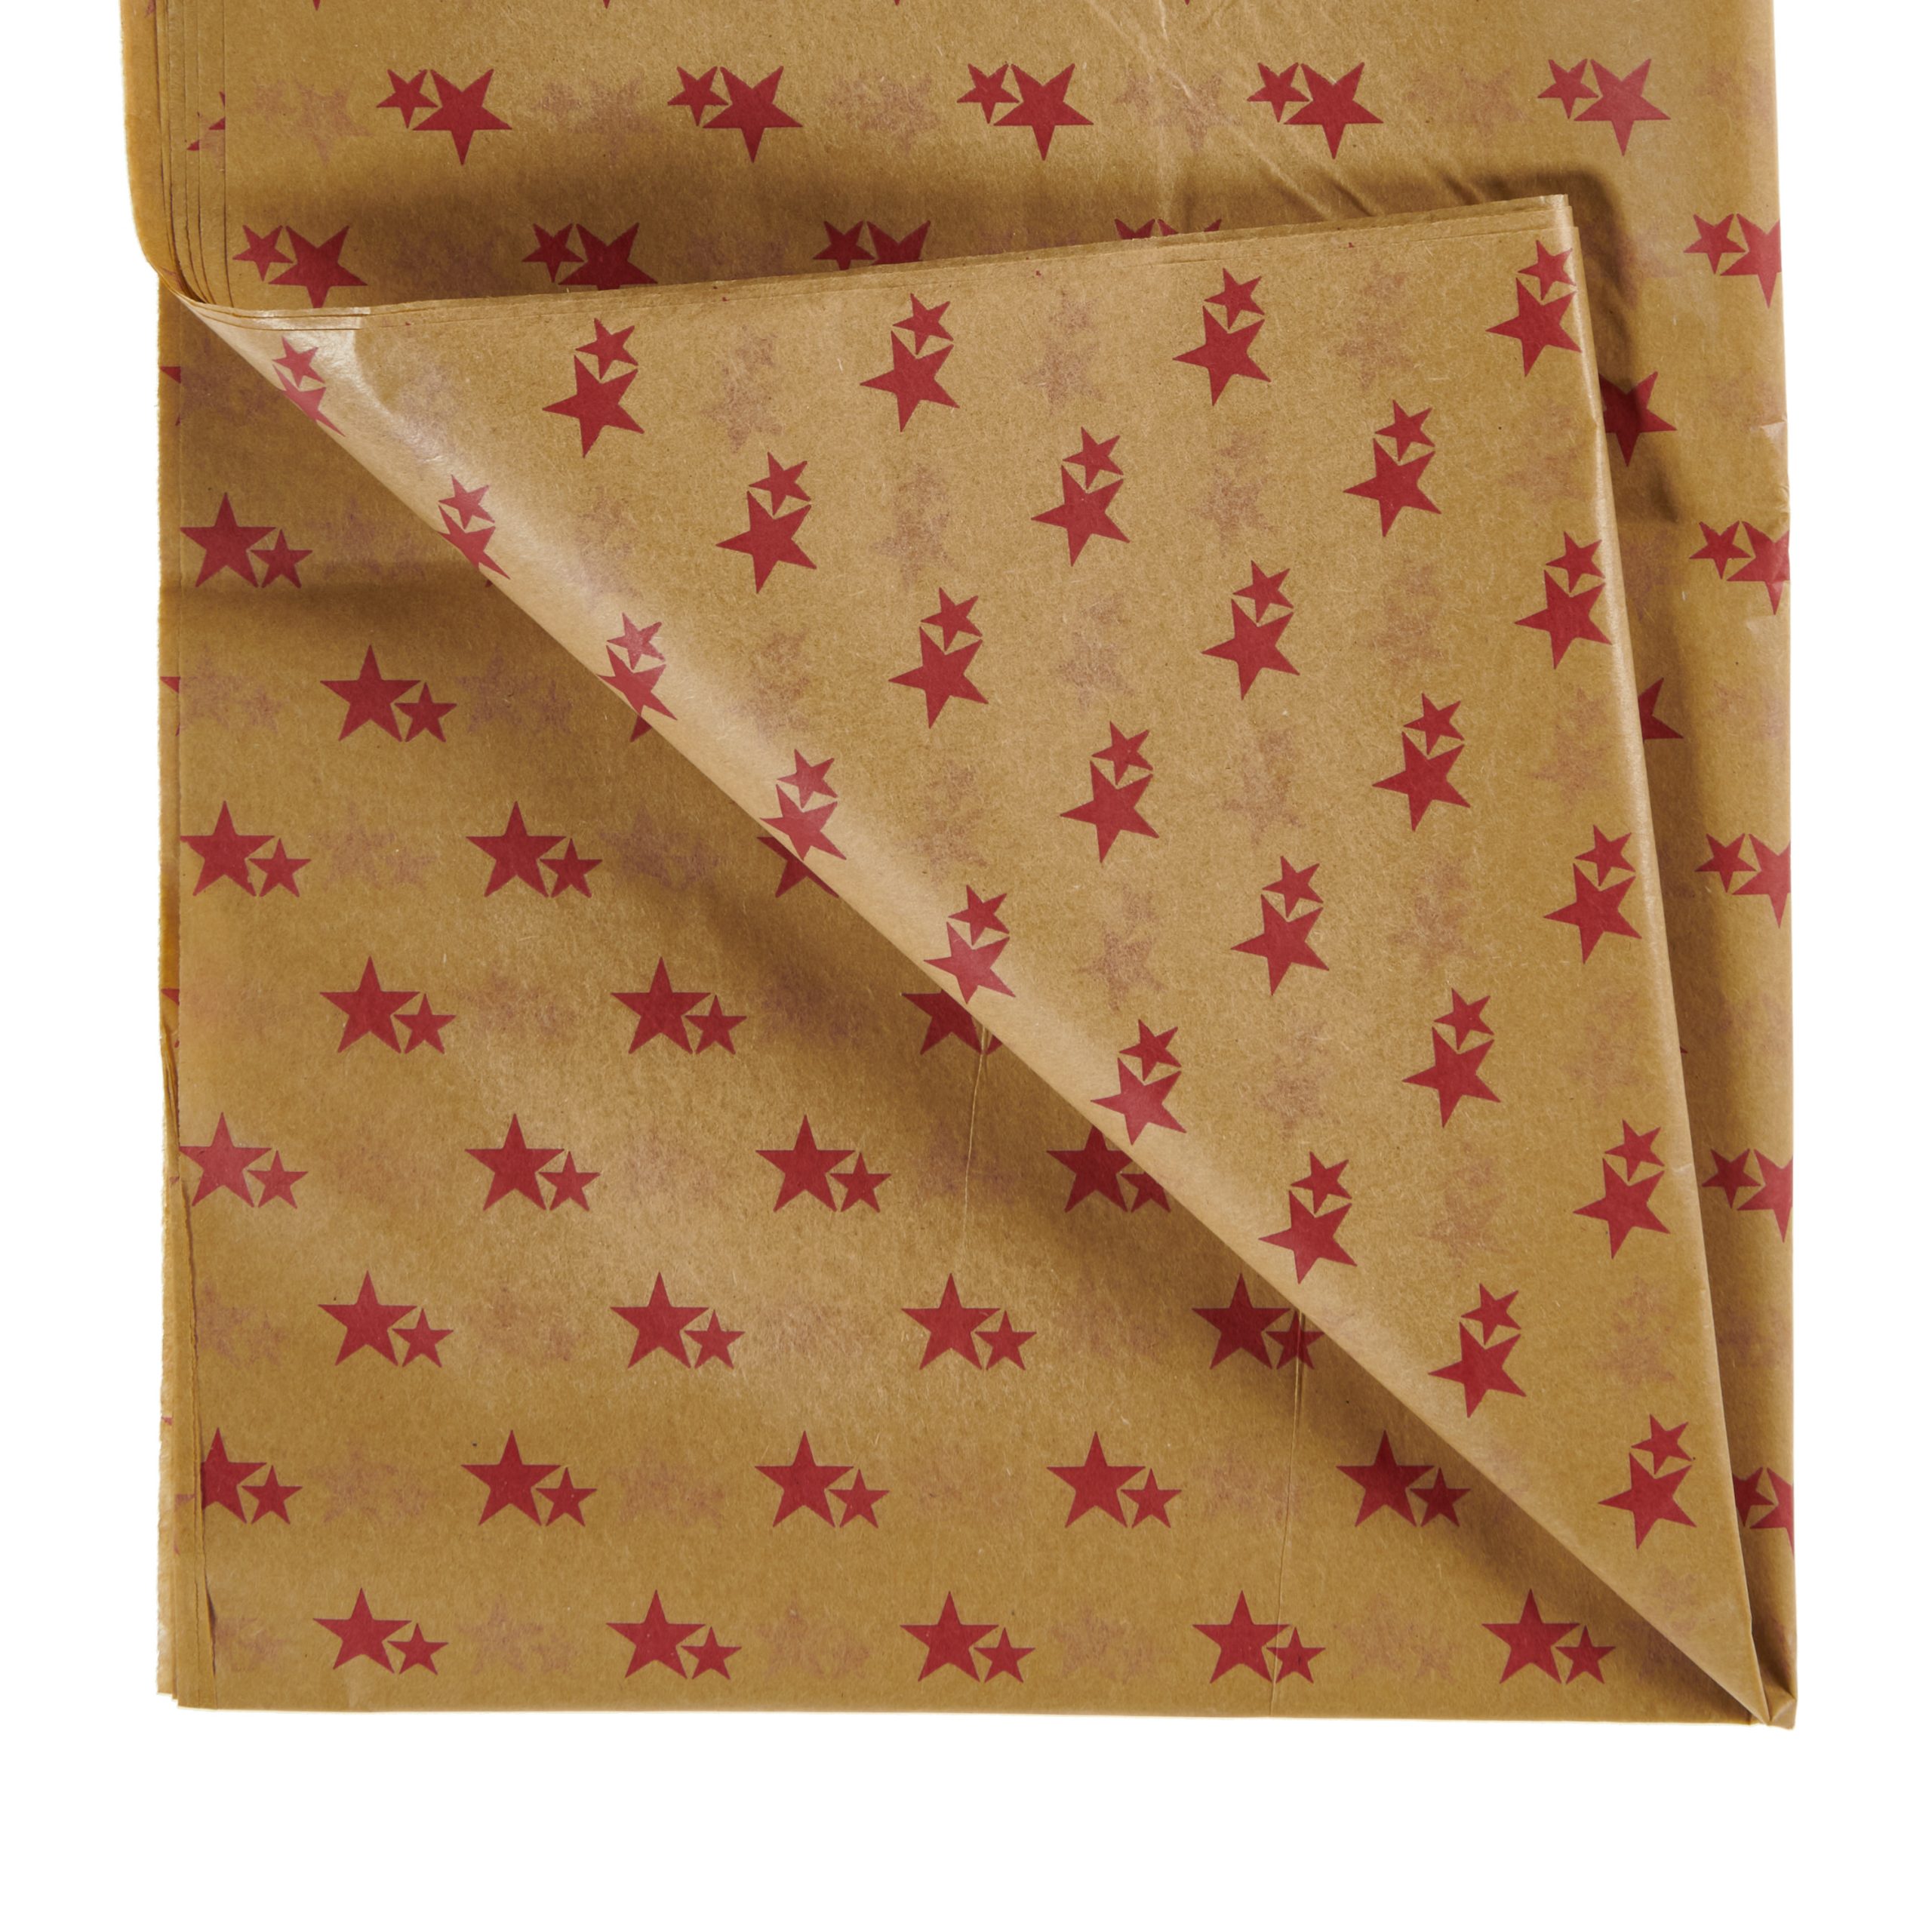 louis vuitton wrapping paper